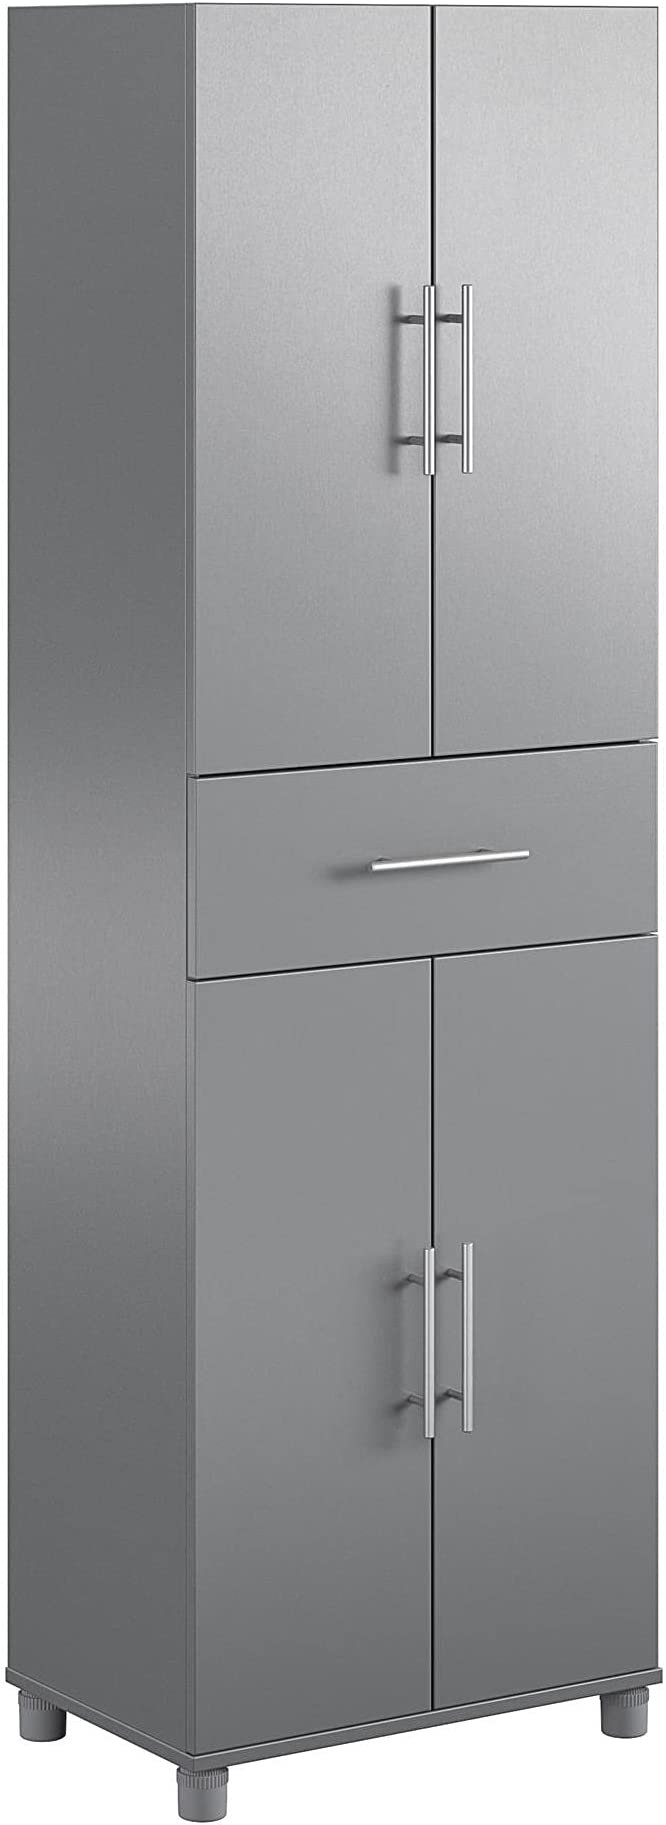 system_build_flat_style_kitchen_cabinet